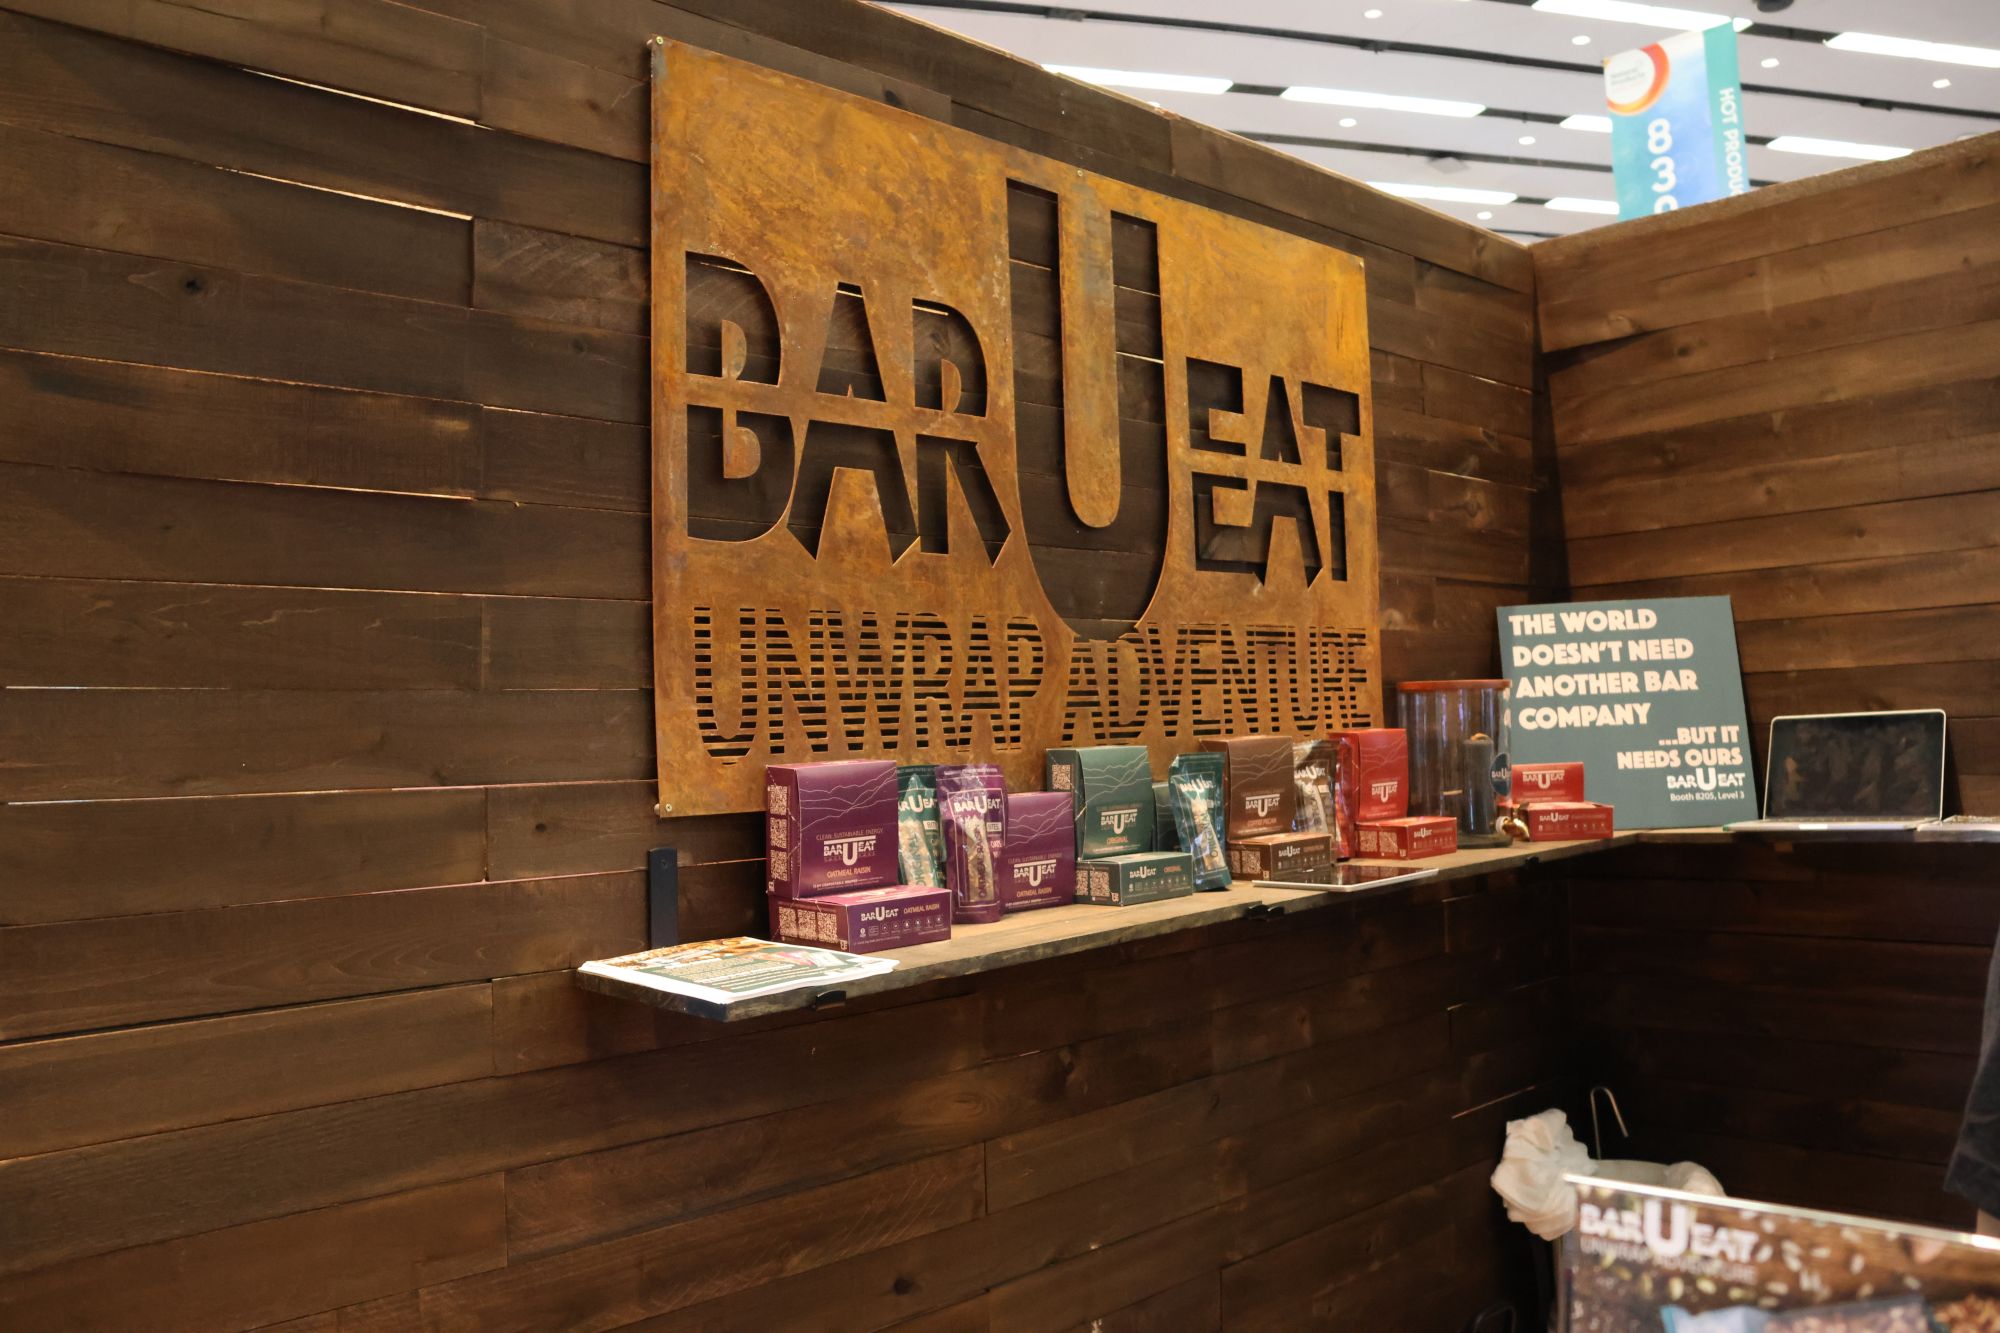 Bar-u-eat booth at expo west 2023